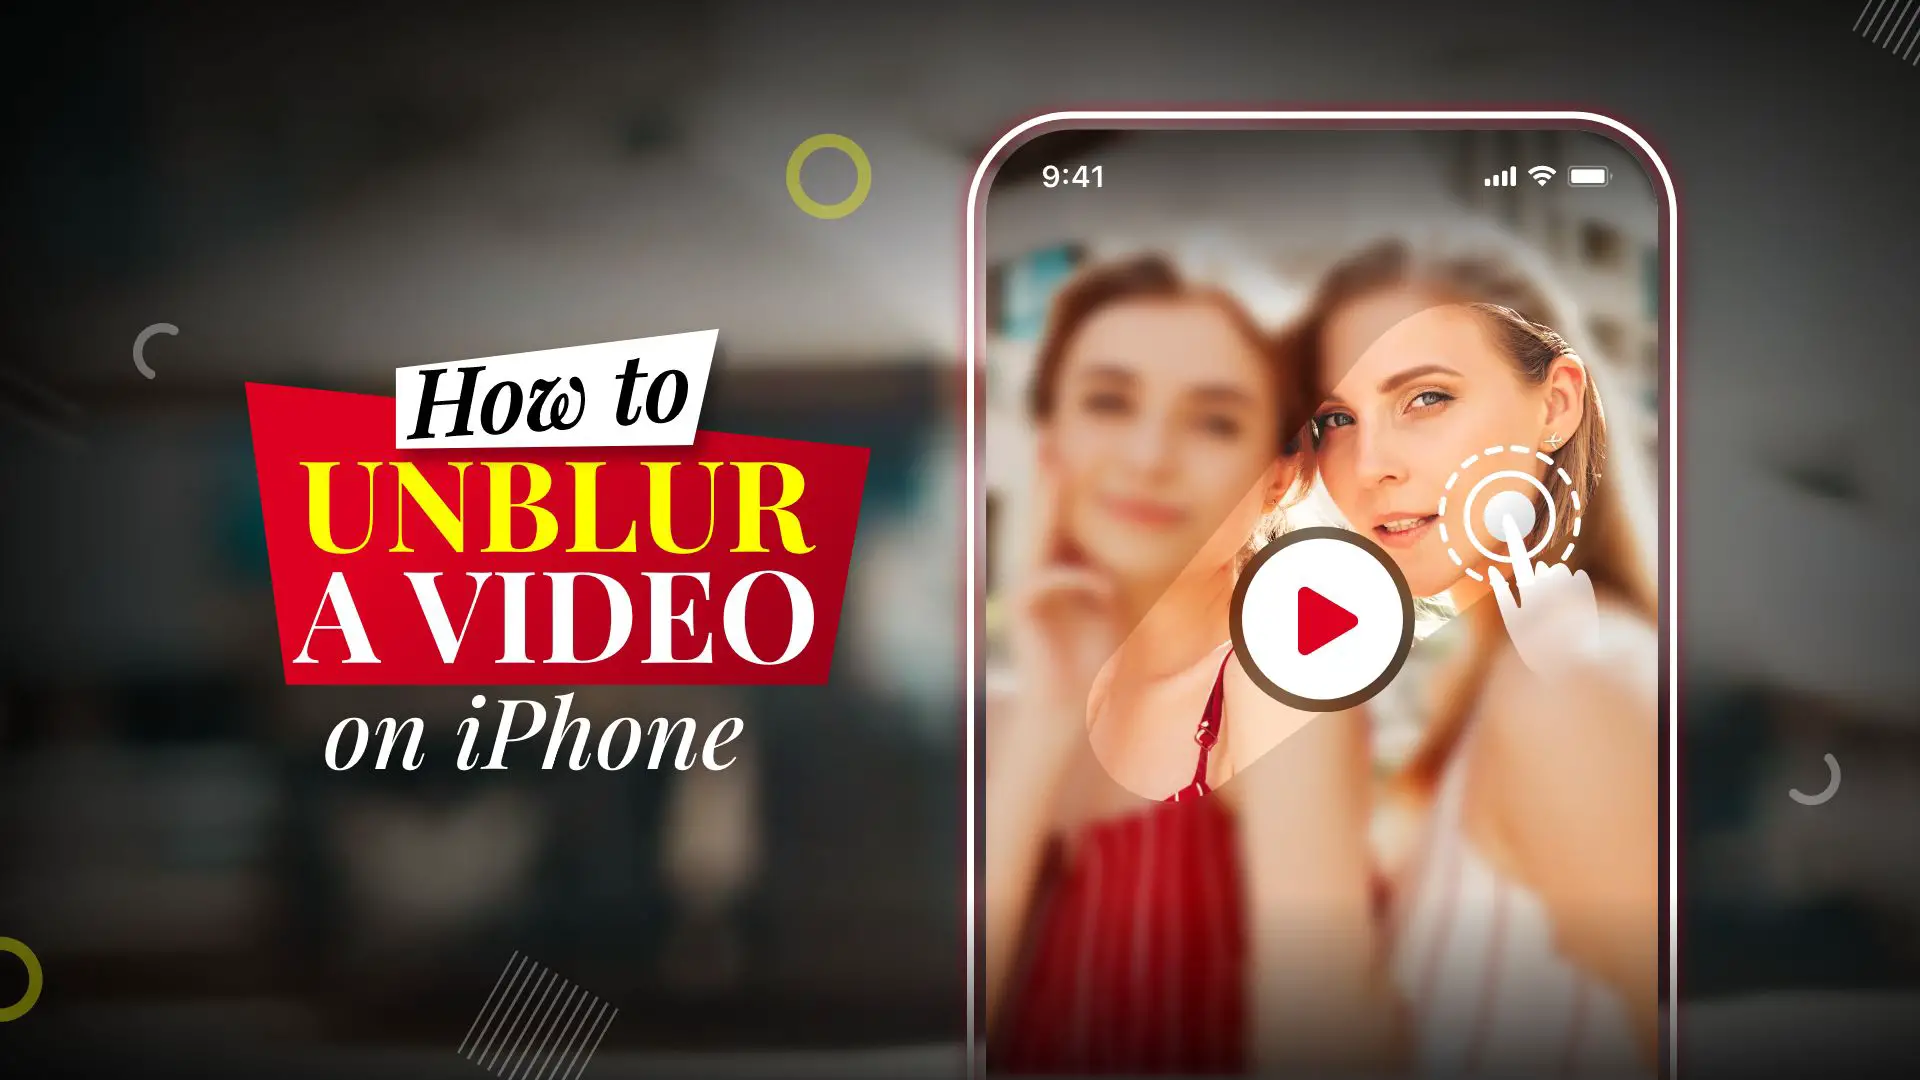 how to unblur a video on iPhone